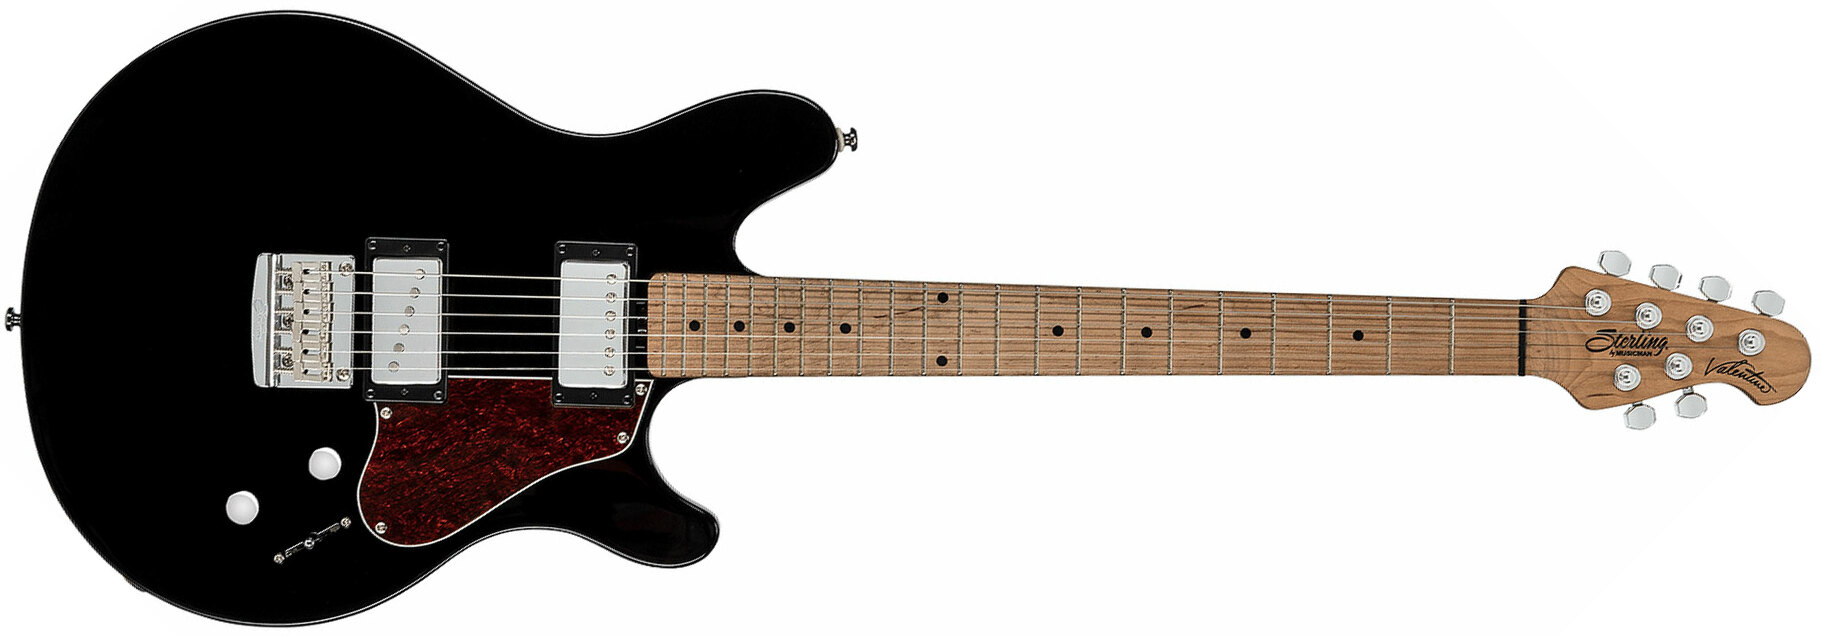 Sterling By Musicman James Valentine Jv60 Signature Hh Ht Mn - Black - Signature electric guitar - Main picture